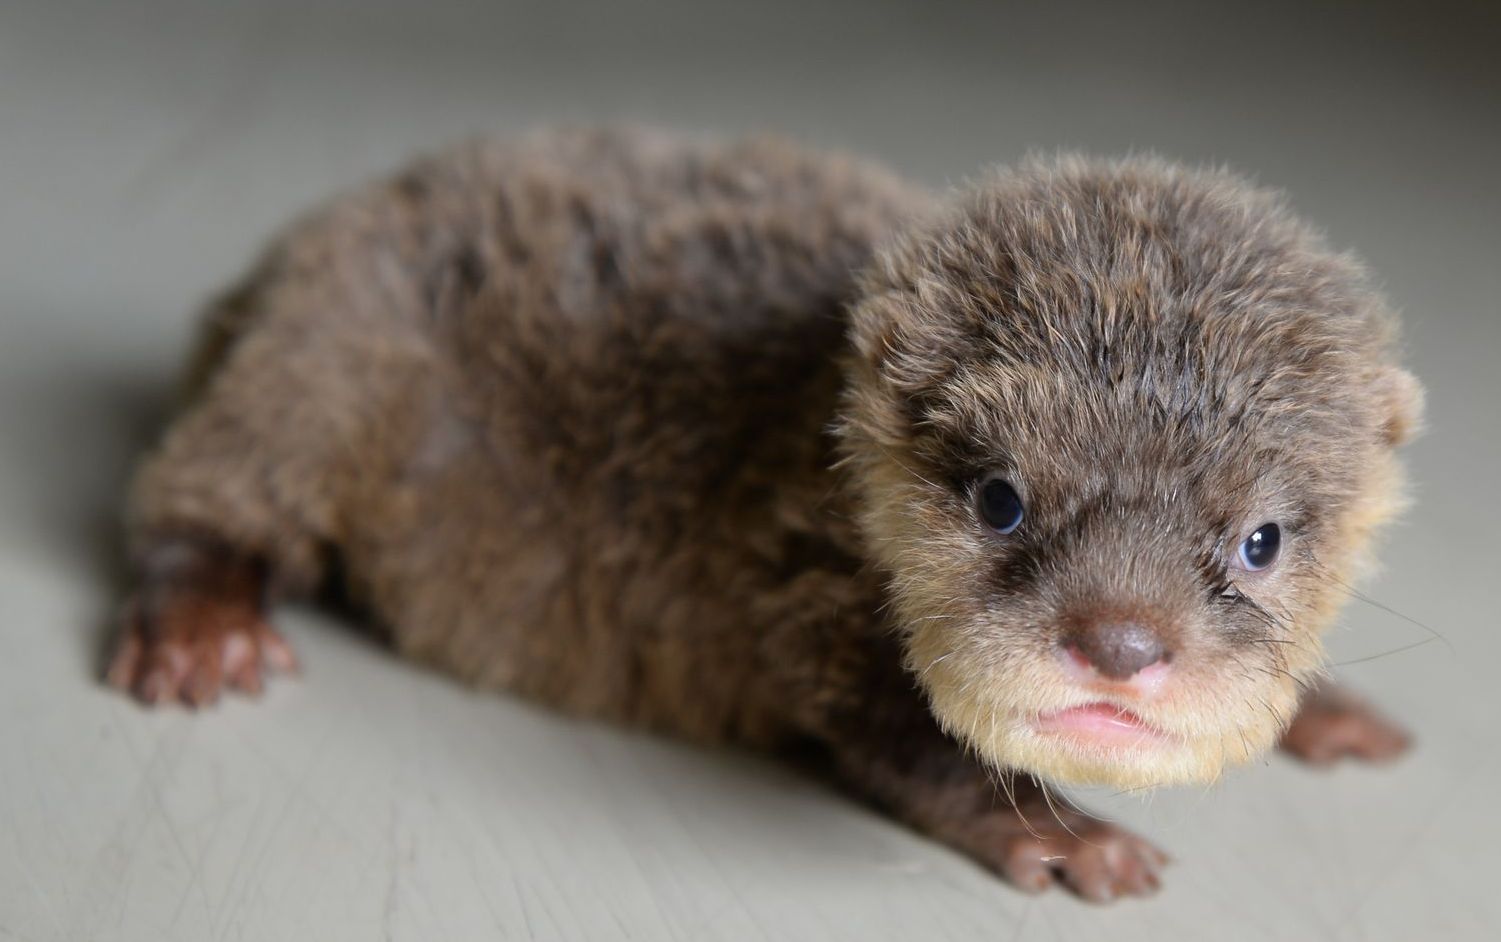 a baby otter is sitting on the floor and looking at the camera .